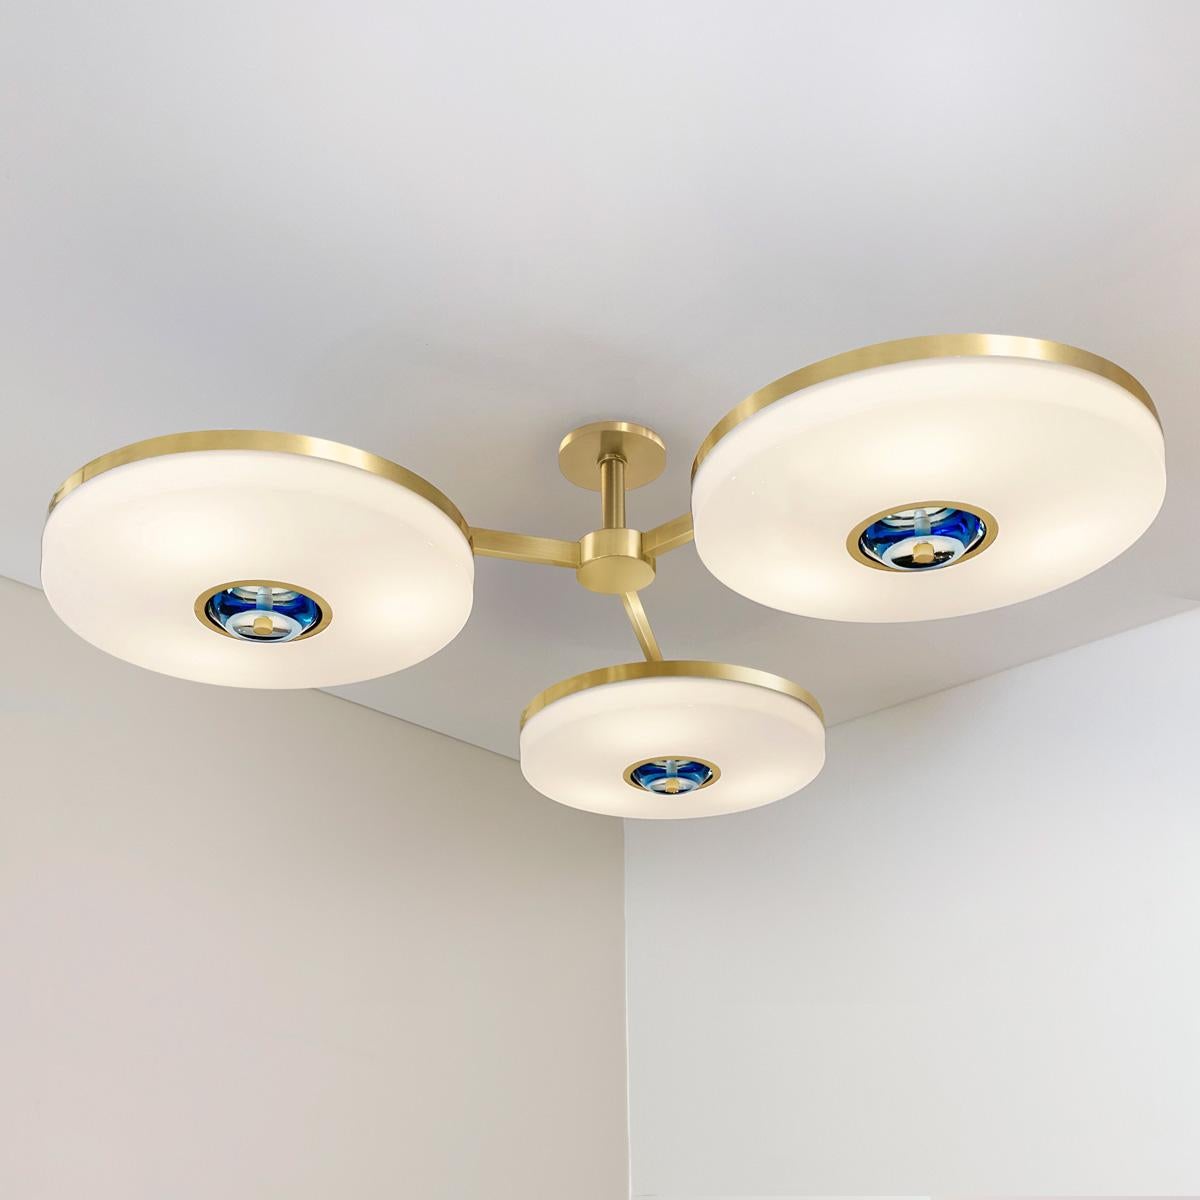 Modern Iris N. 3 Ceiling Light by Gaspare Asaro-Polished Nickel Finish For Sale